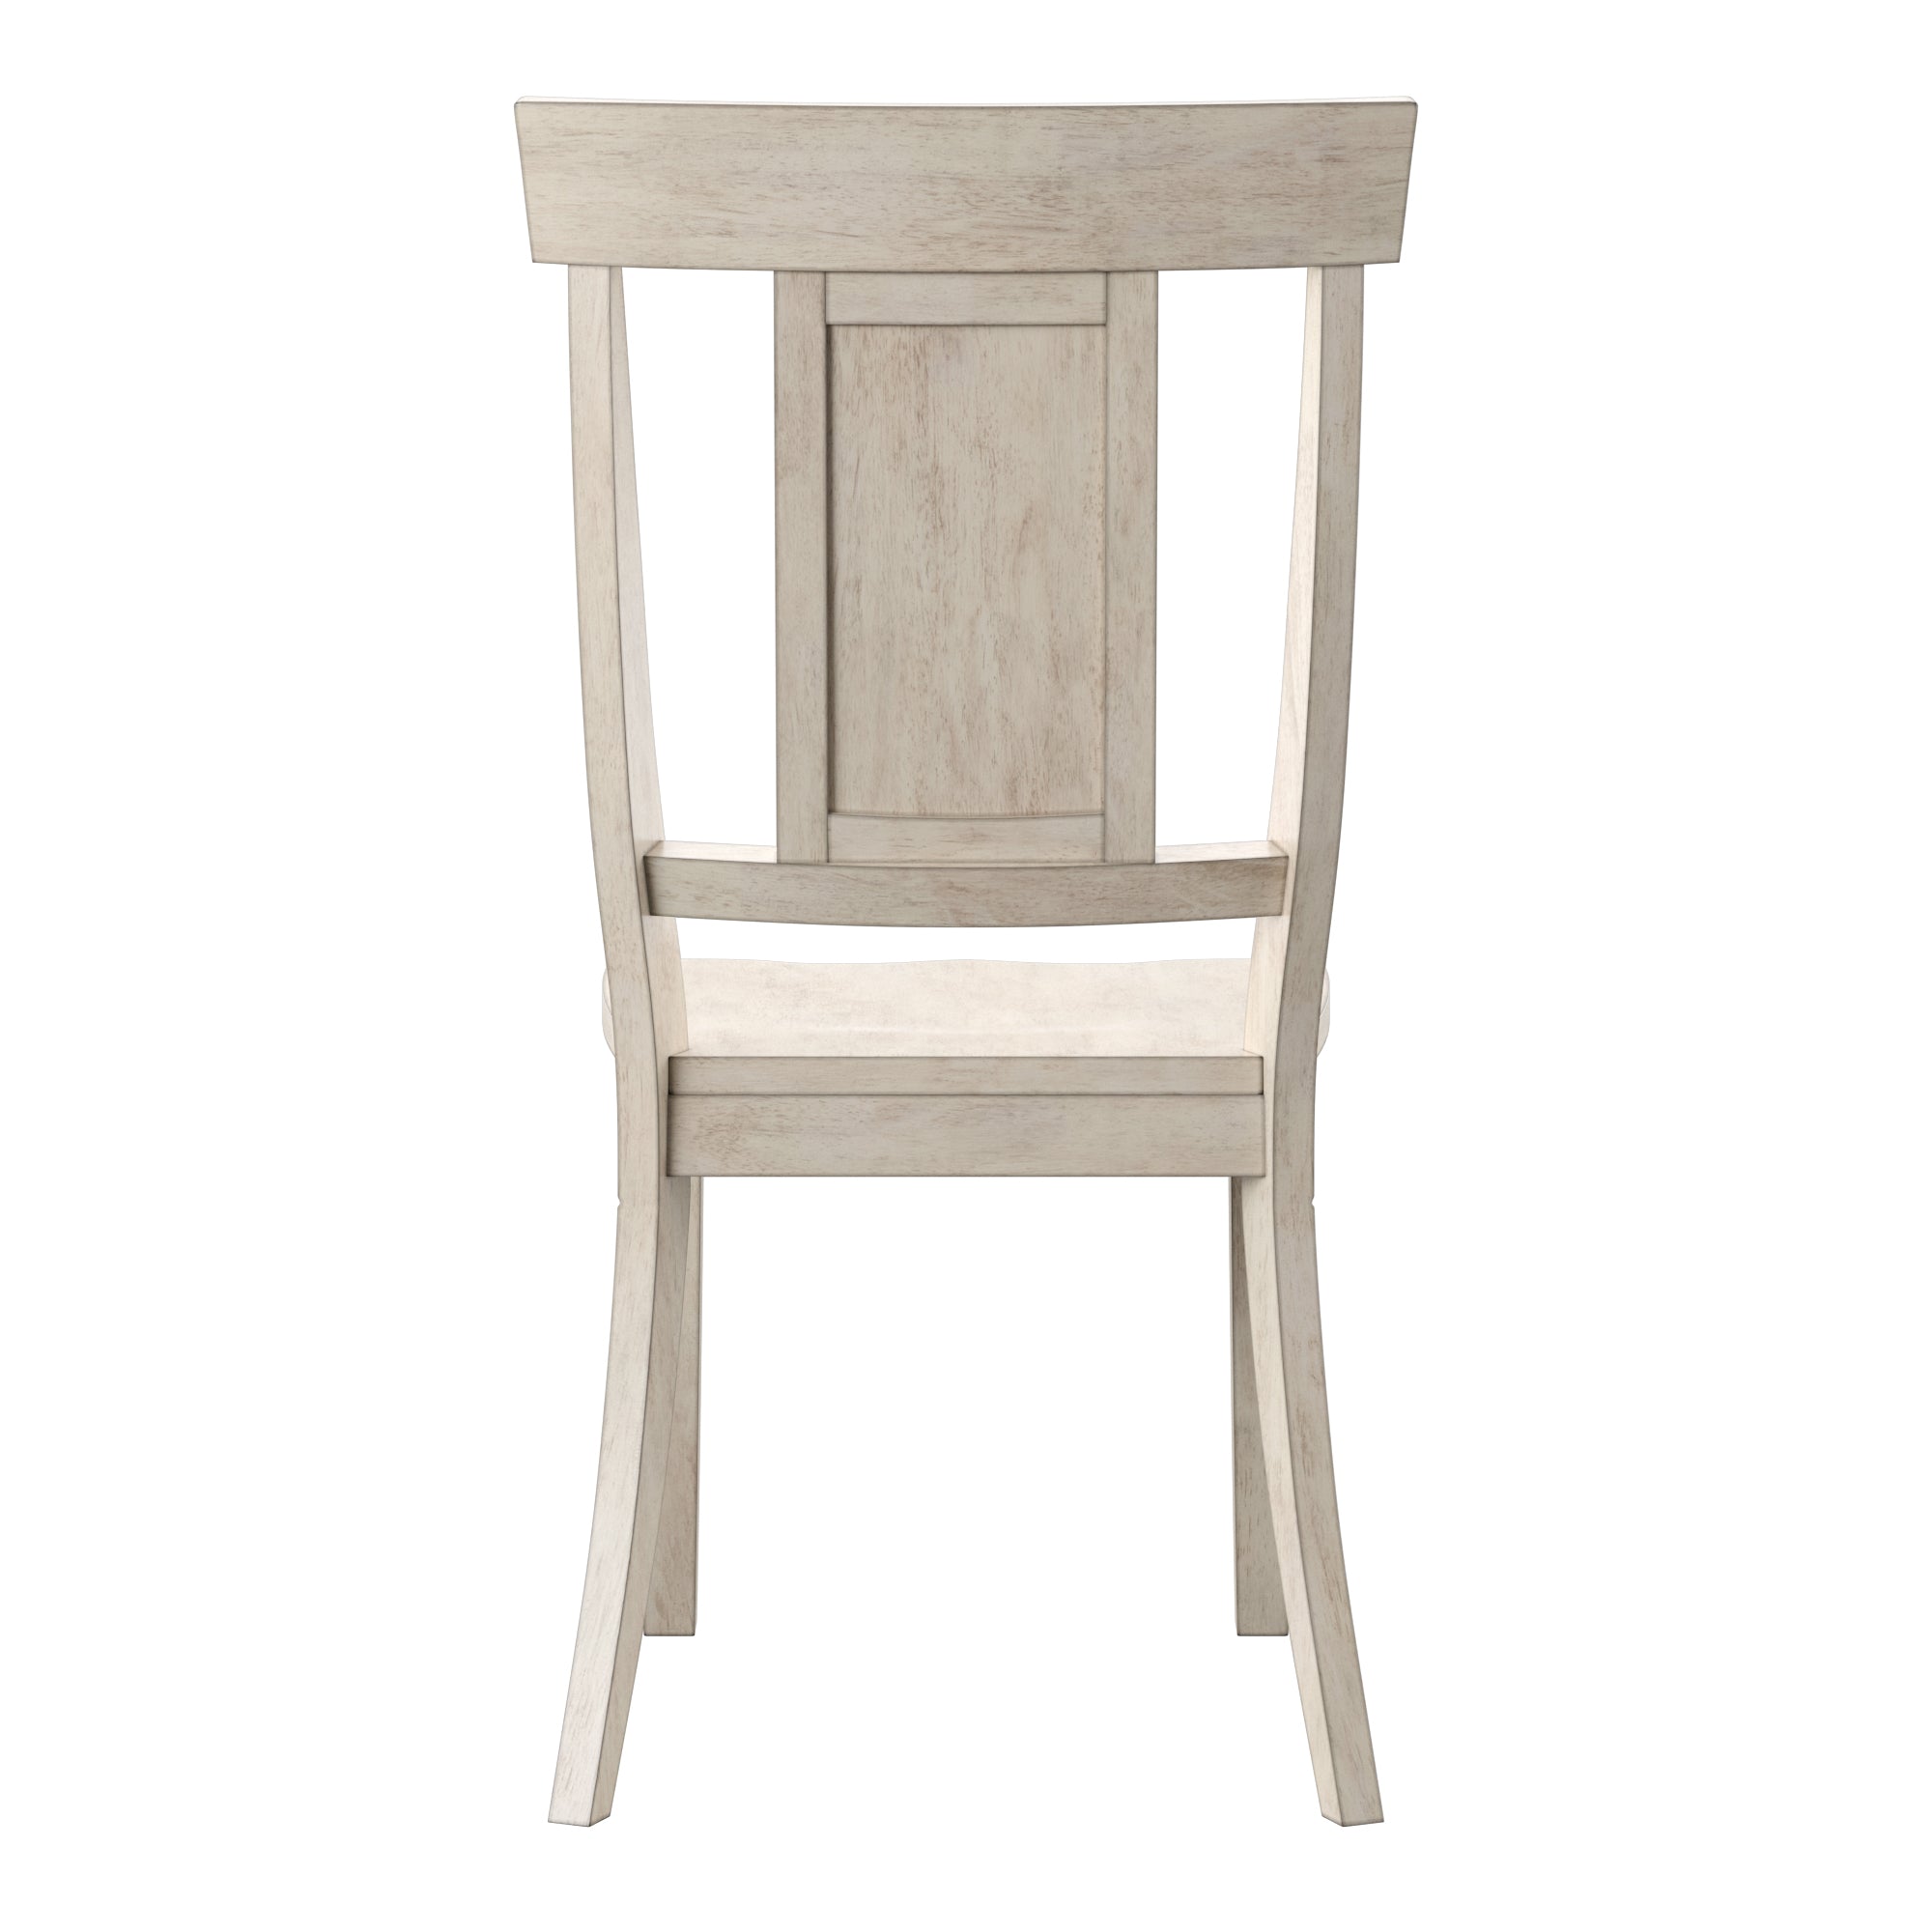 Panel Back Wood Dining Chairs (Set of 2) - Antique White Finish